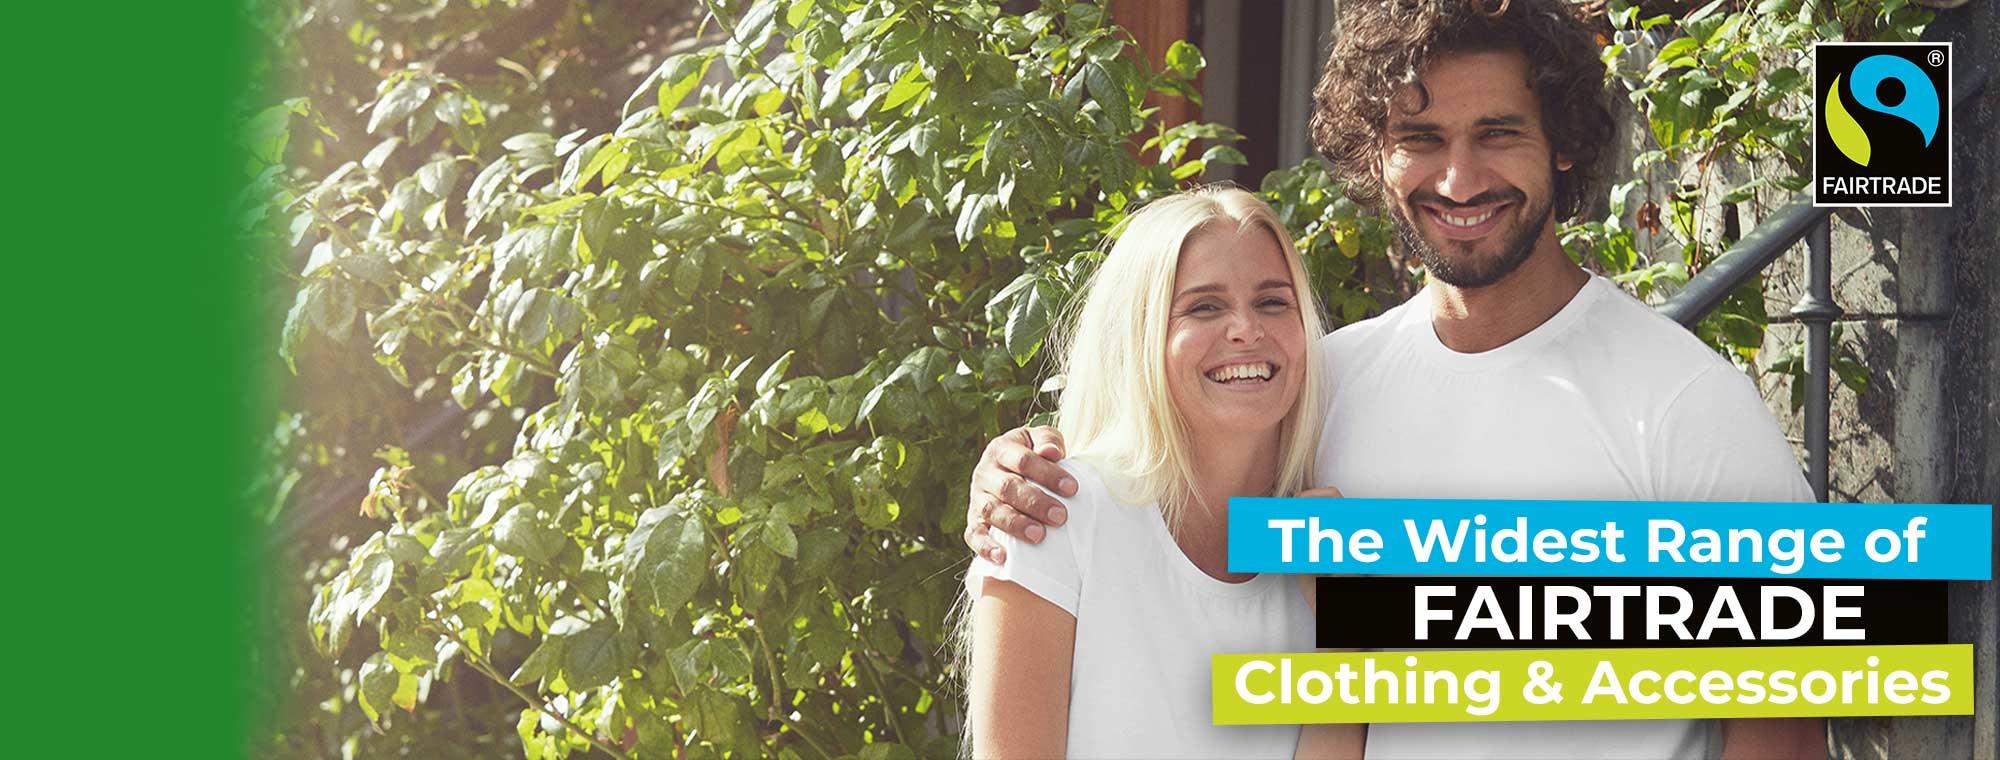 <h1>FairTrade & Organic Clothing & Accessories</h1>Eve2 carries one of the largest ranges of FairTrade clothing in the UK.